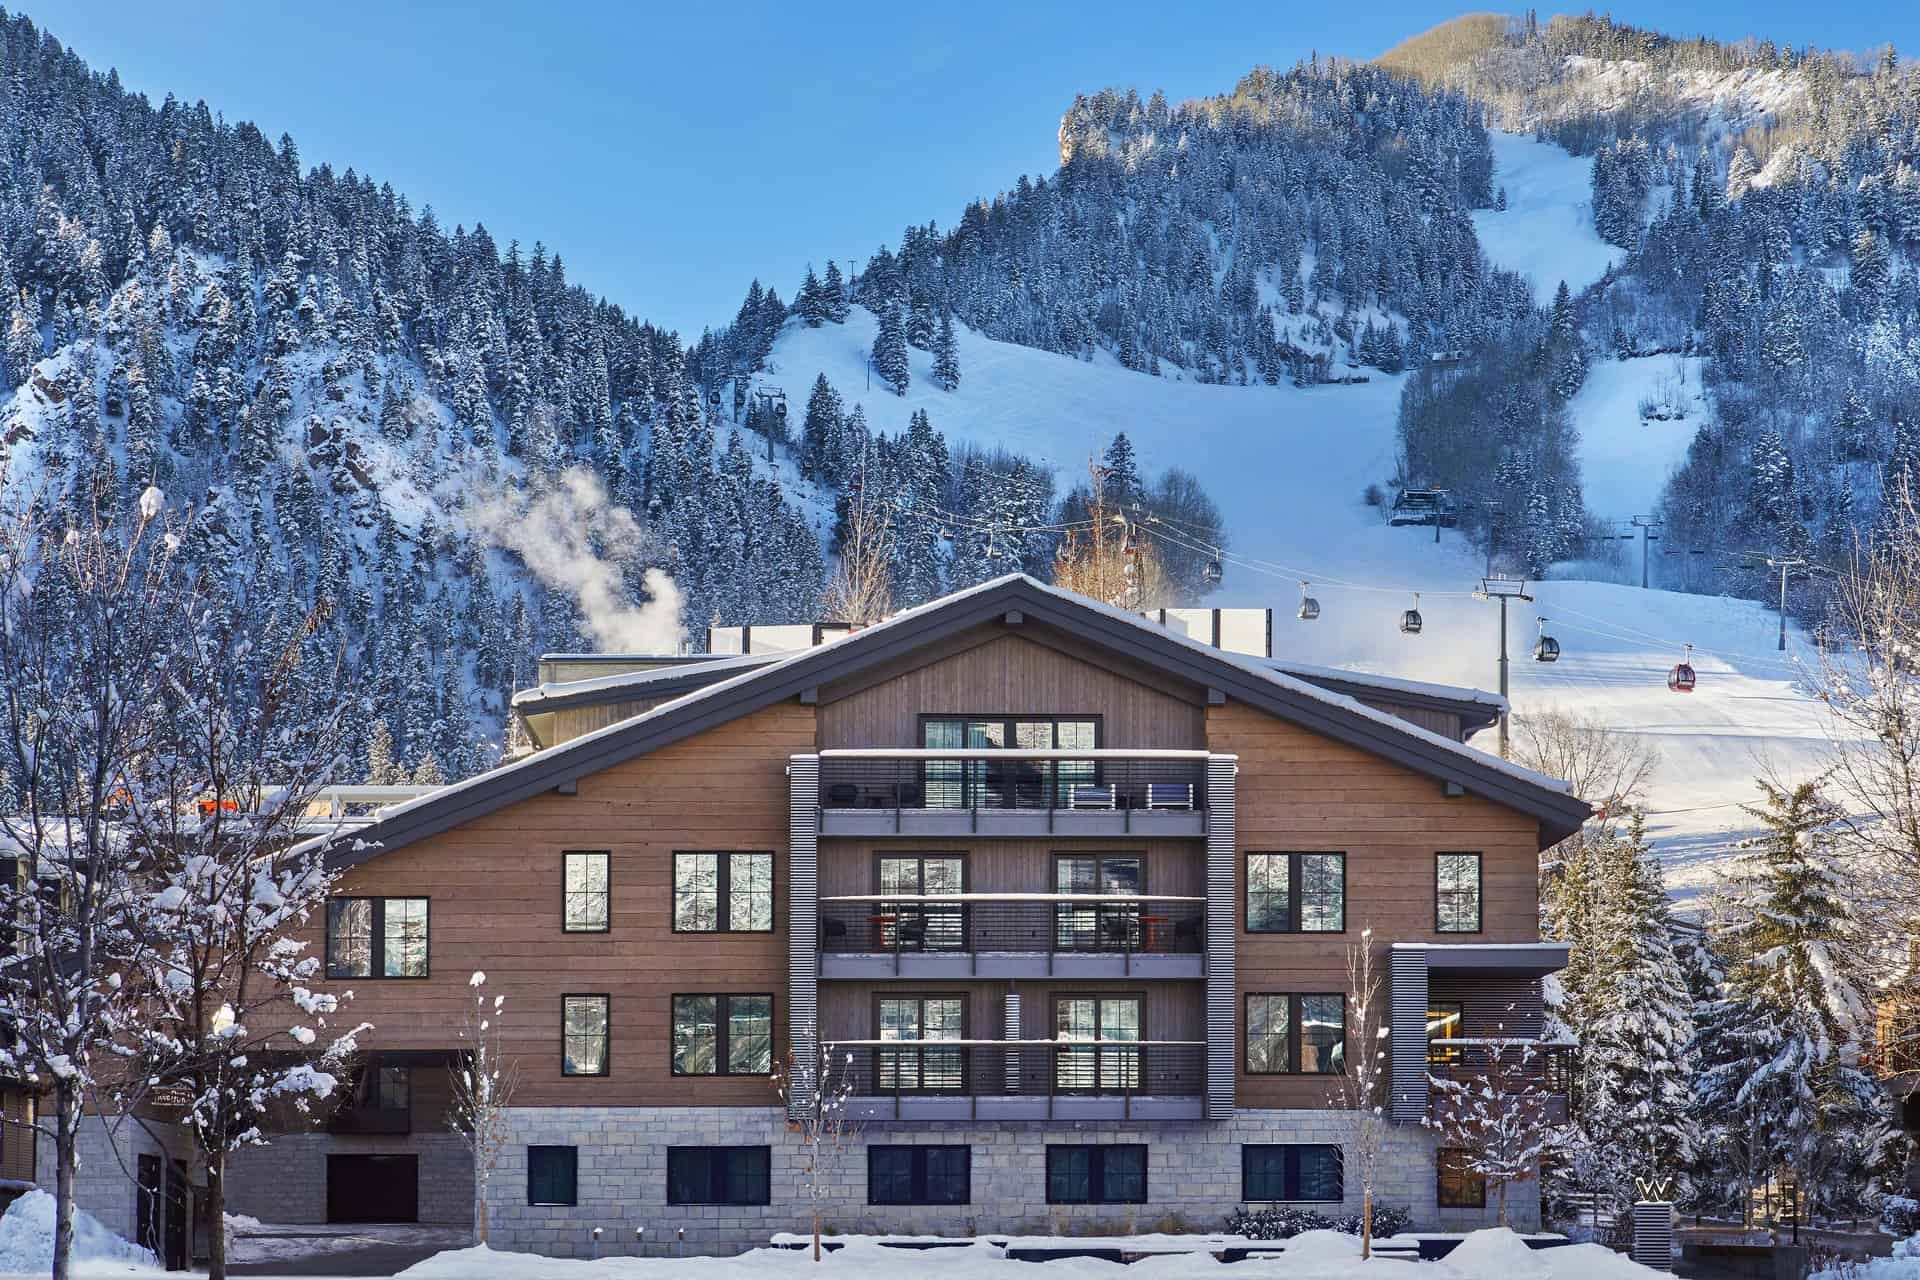 The Sky Residences at W Aspen overlooking snowy skiing mountains.